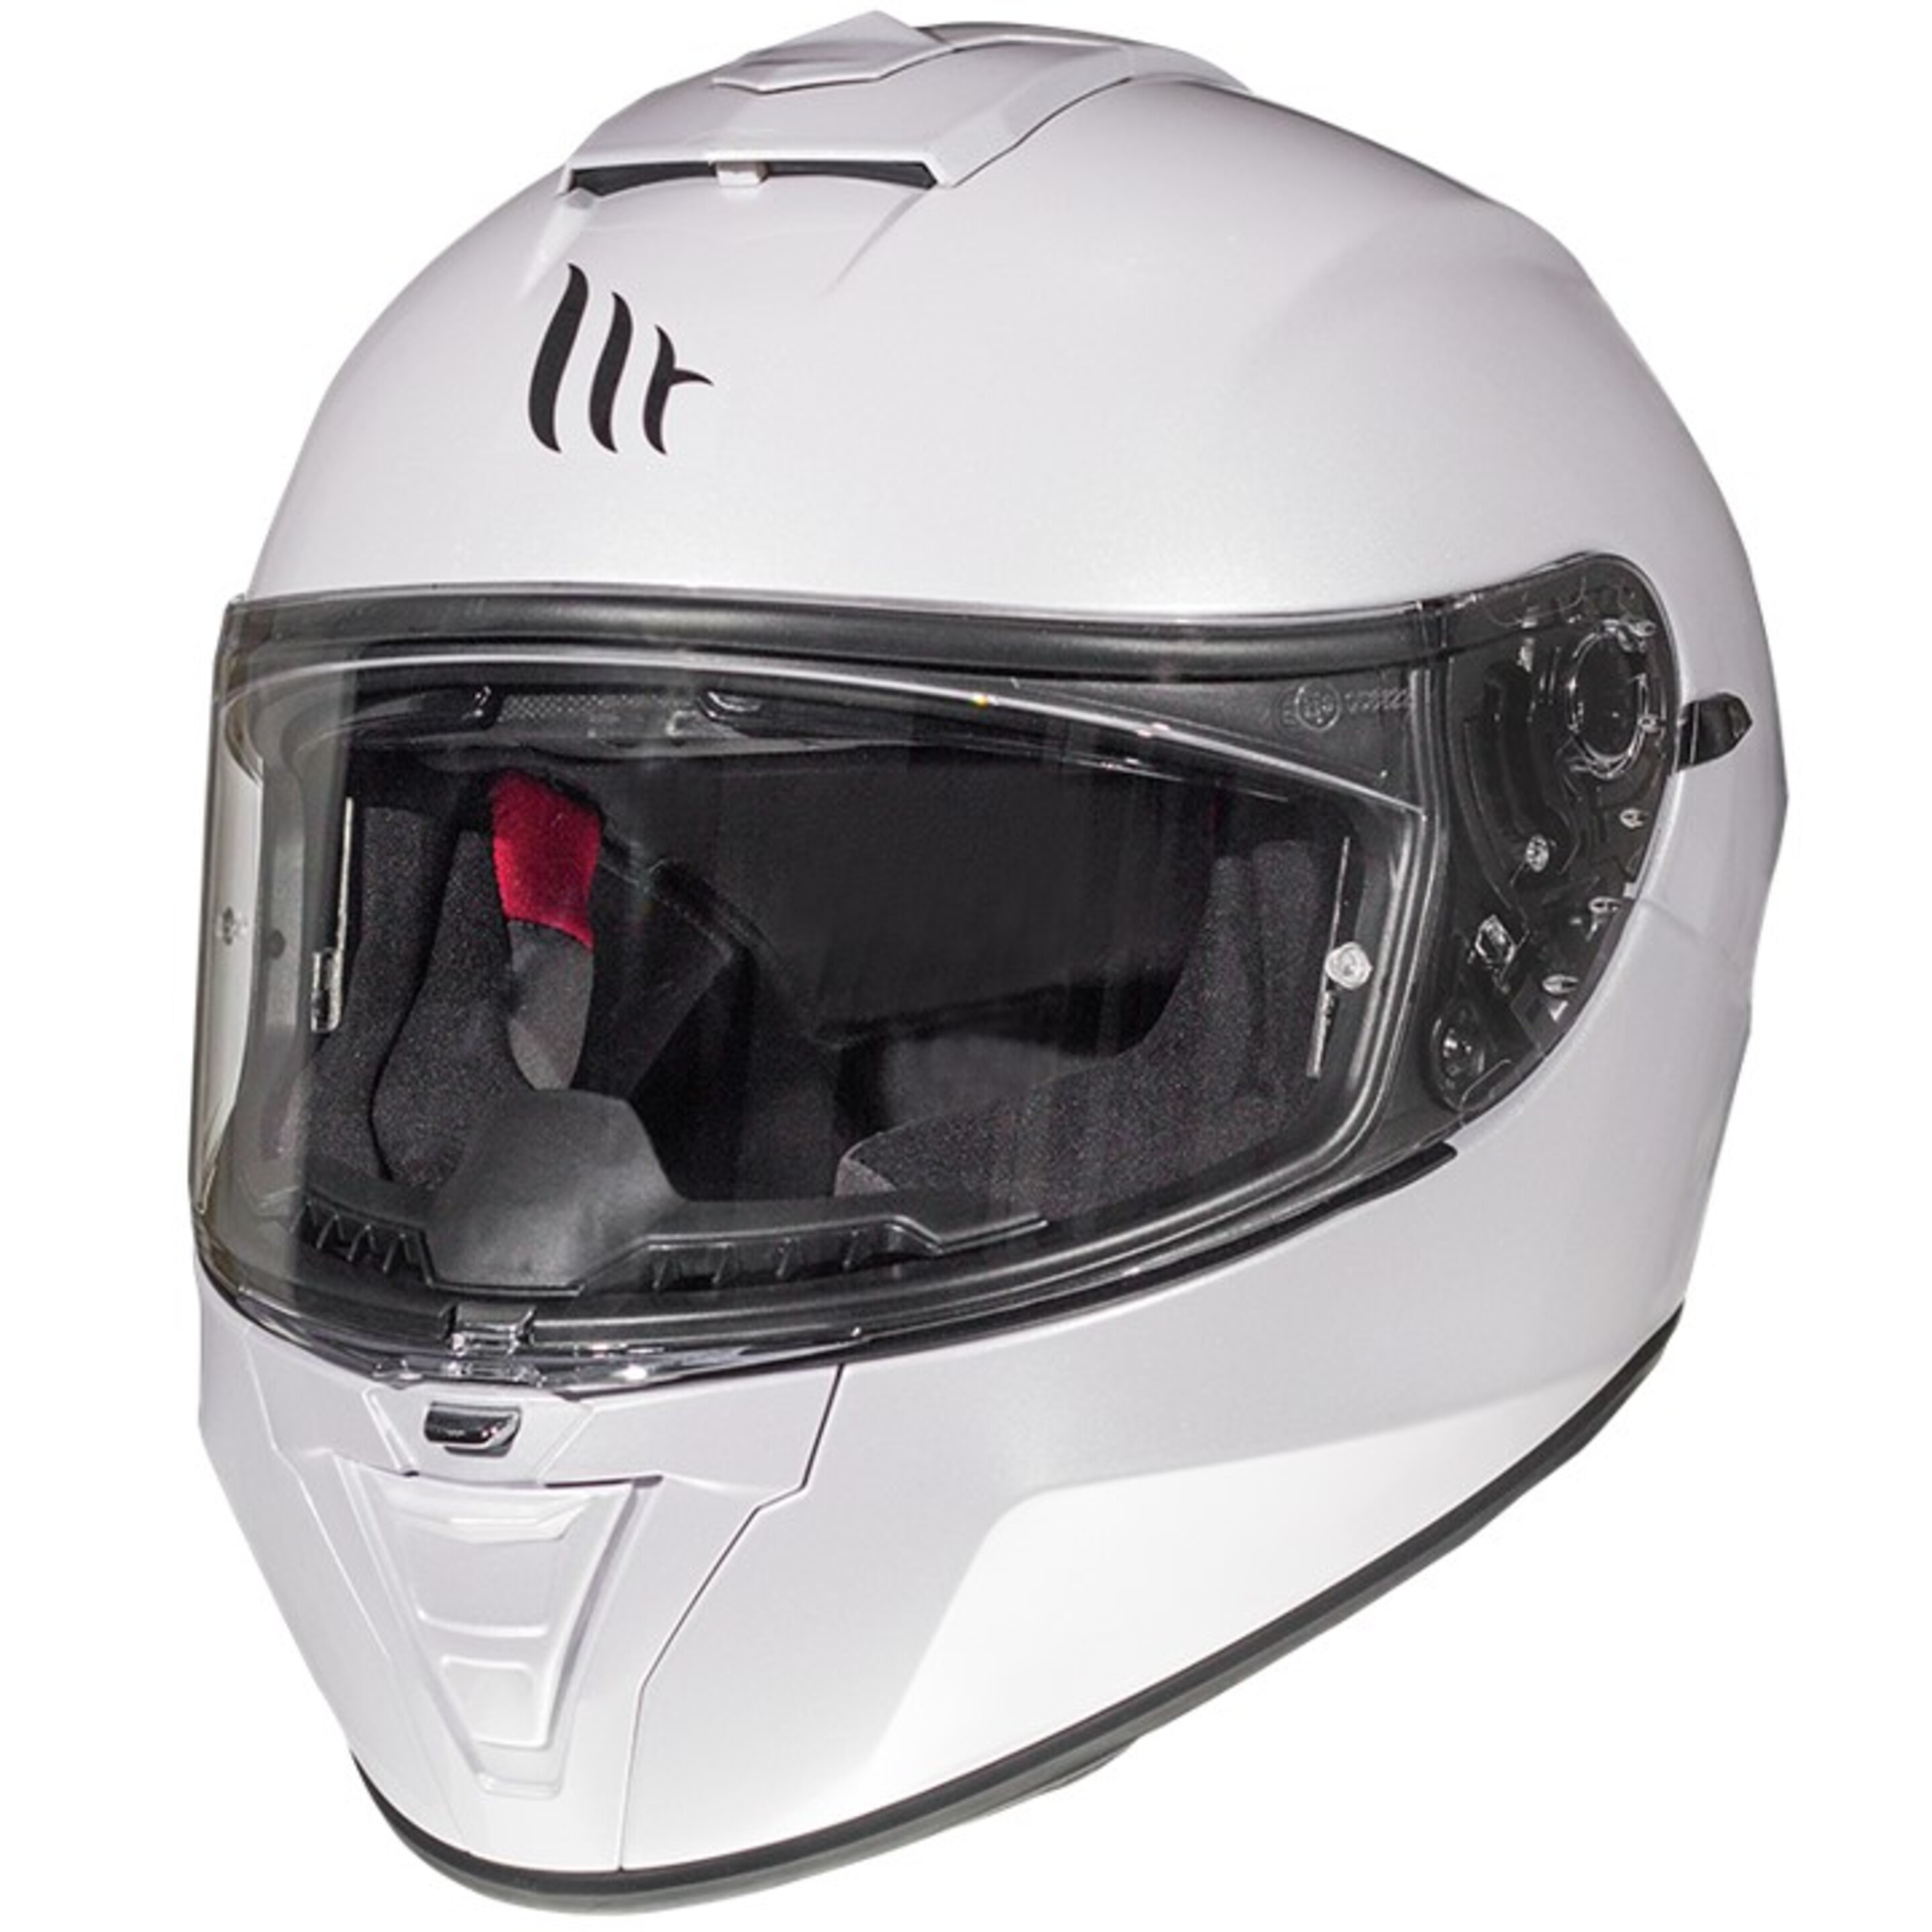 Casco Mt Blade 2 Sv Solid A0 Gloss Pearl White T/m - Blanco - Casco Mt Blade 2 Sv Solid A0 Gloss  MKP